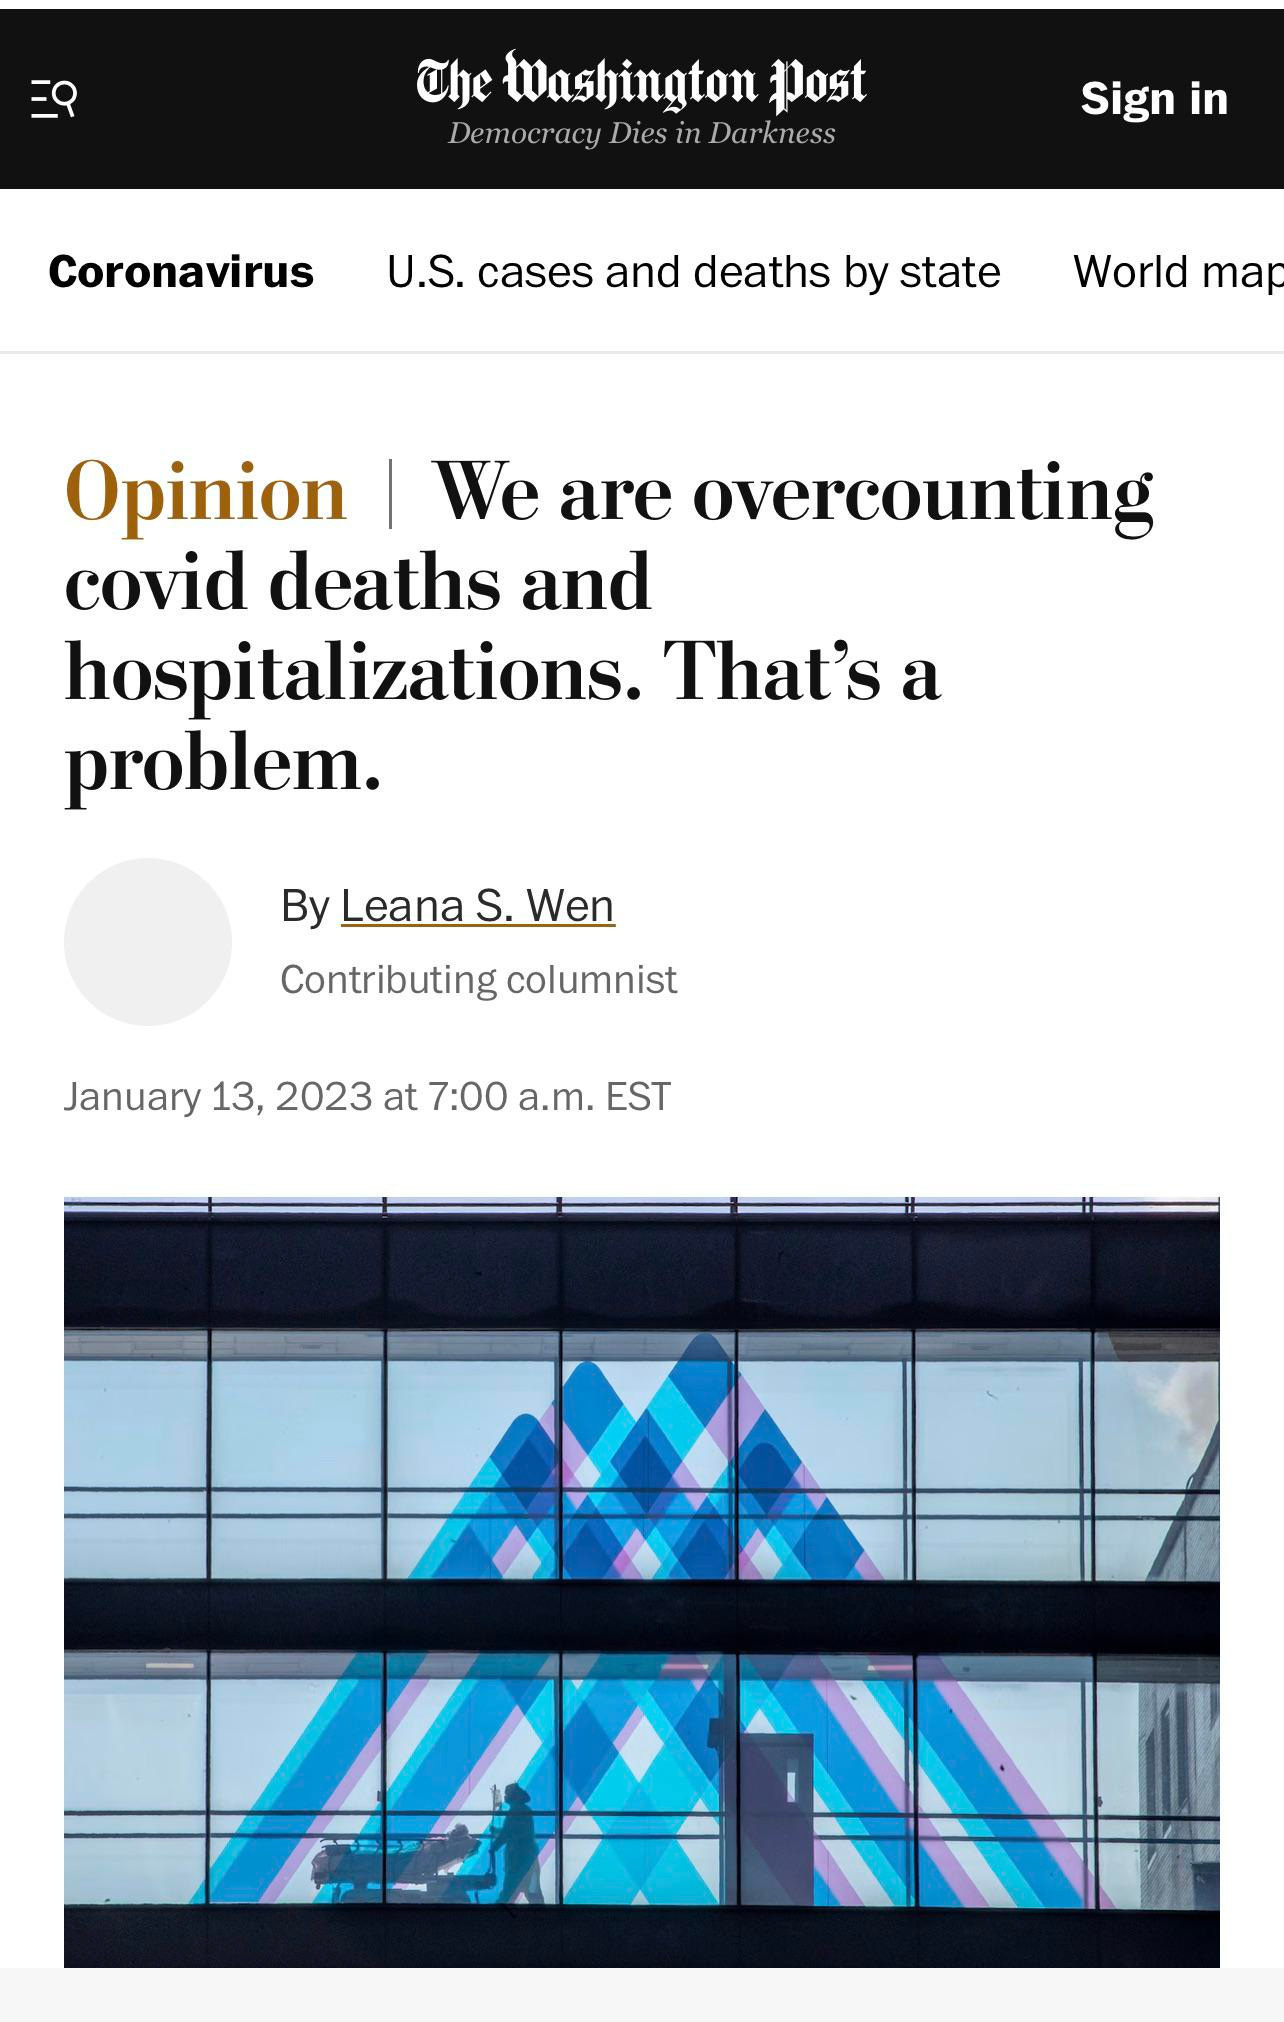 Screencap of a WaPo oped by Leana Wen amplifying a rightoid conspiracy theory about COVID overcounting